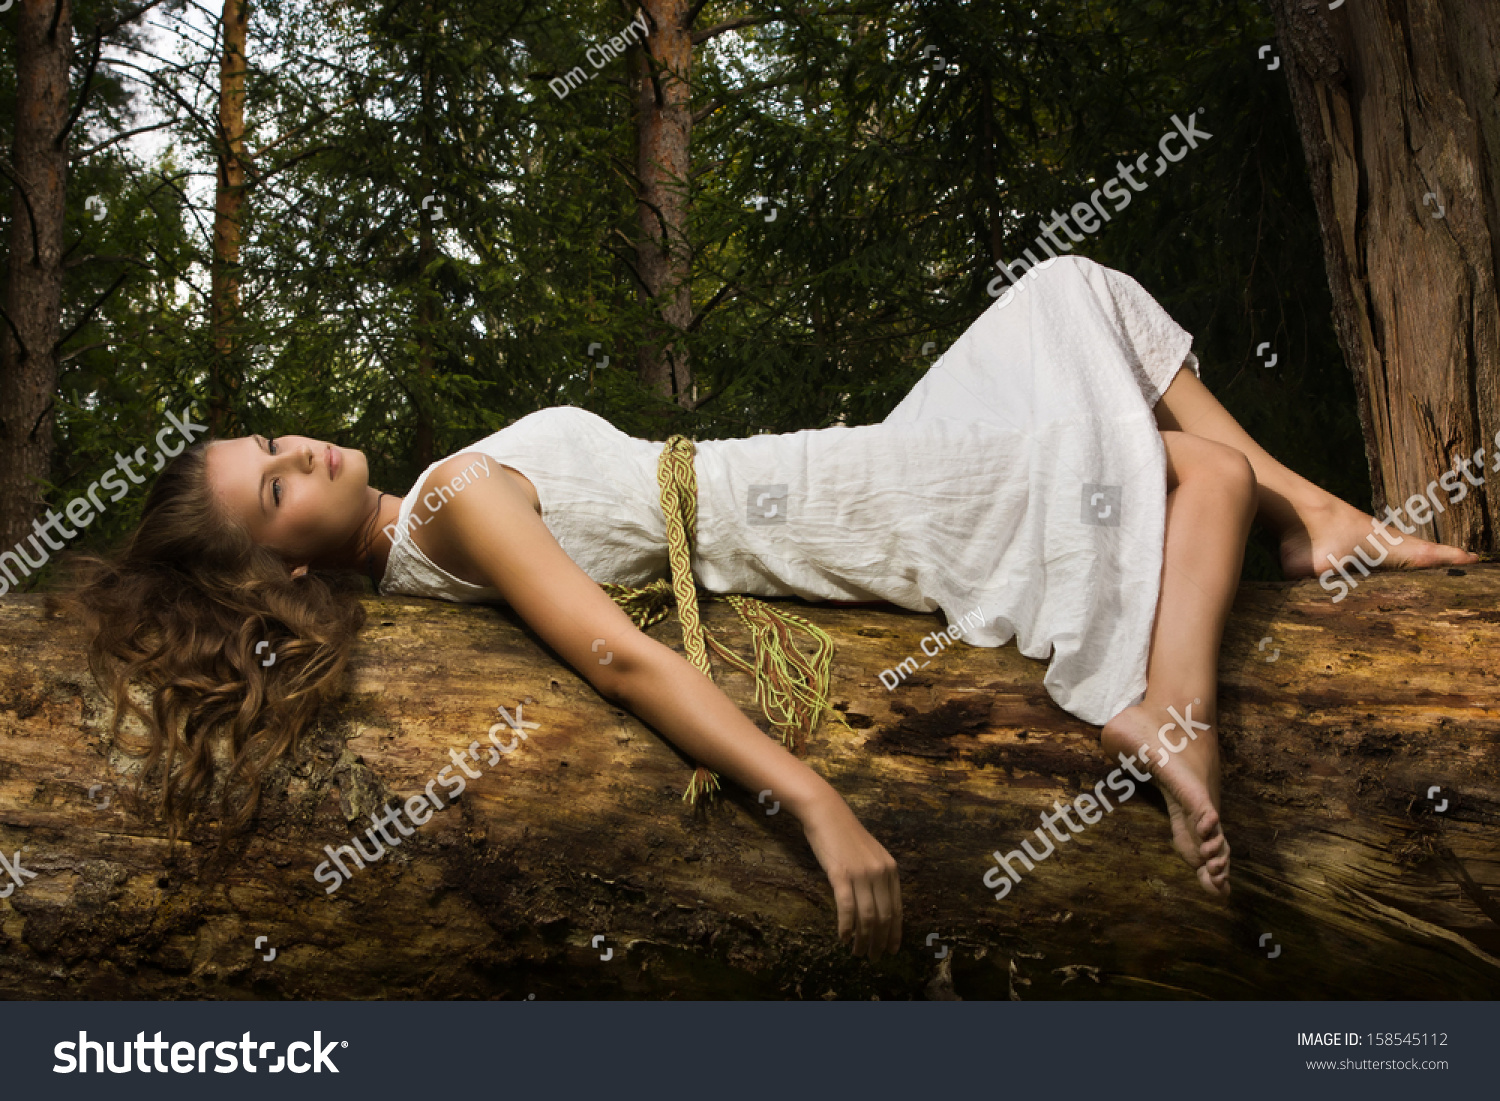 https://image.shutterstock.com/shutterstock/photos/158545112/display_1500/stock-photo-slavonic-girl-in-the-traditional-suit-in-the-deep-forest-158545112.jpg